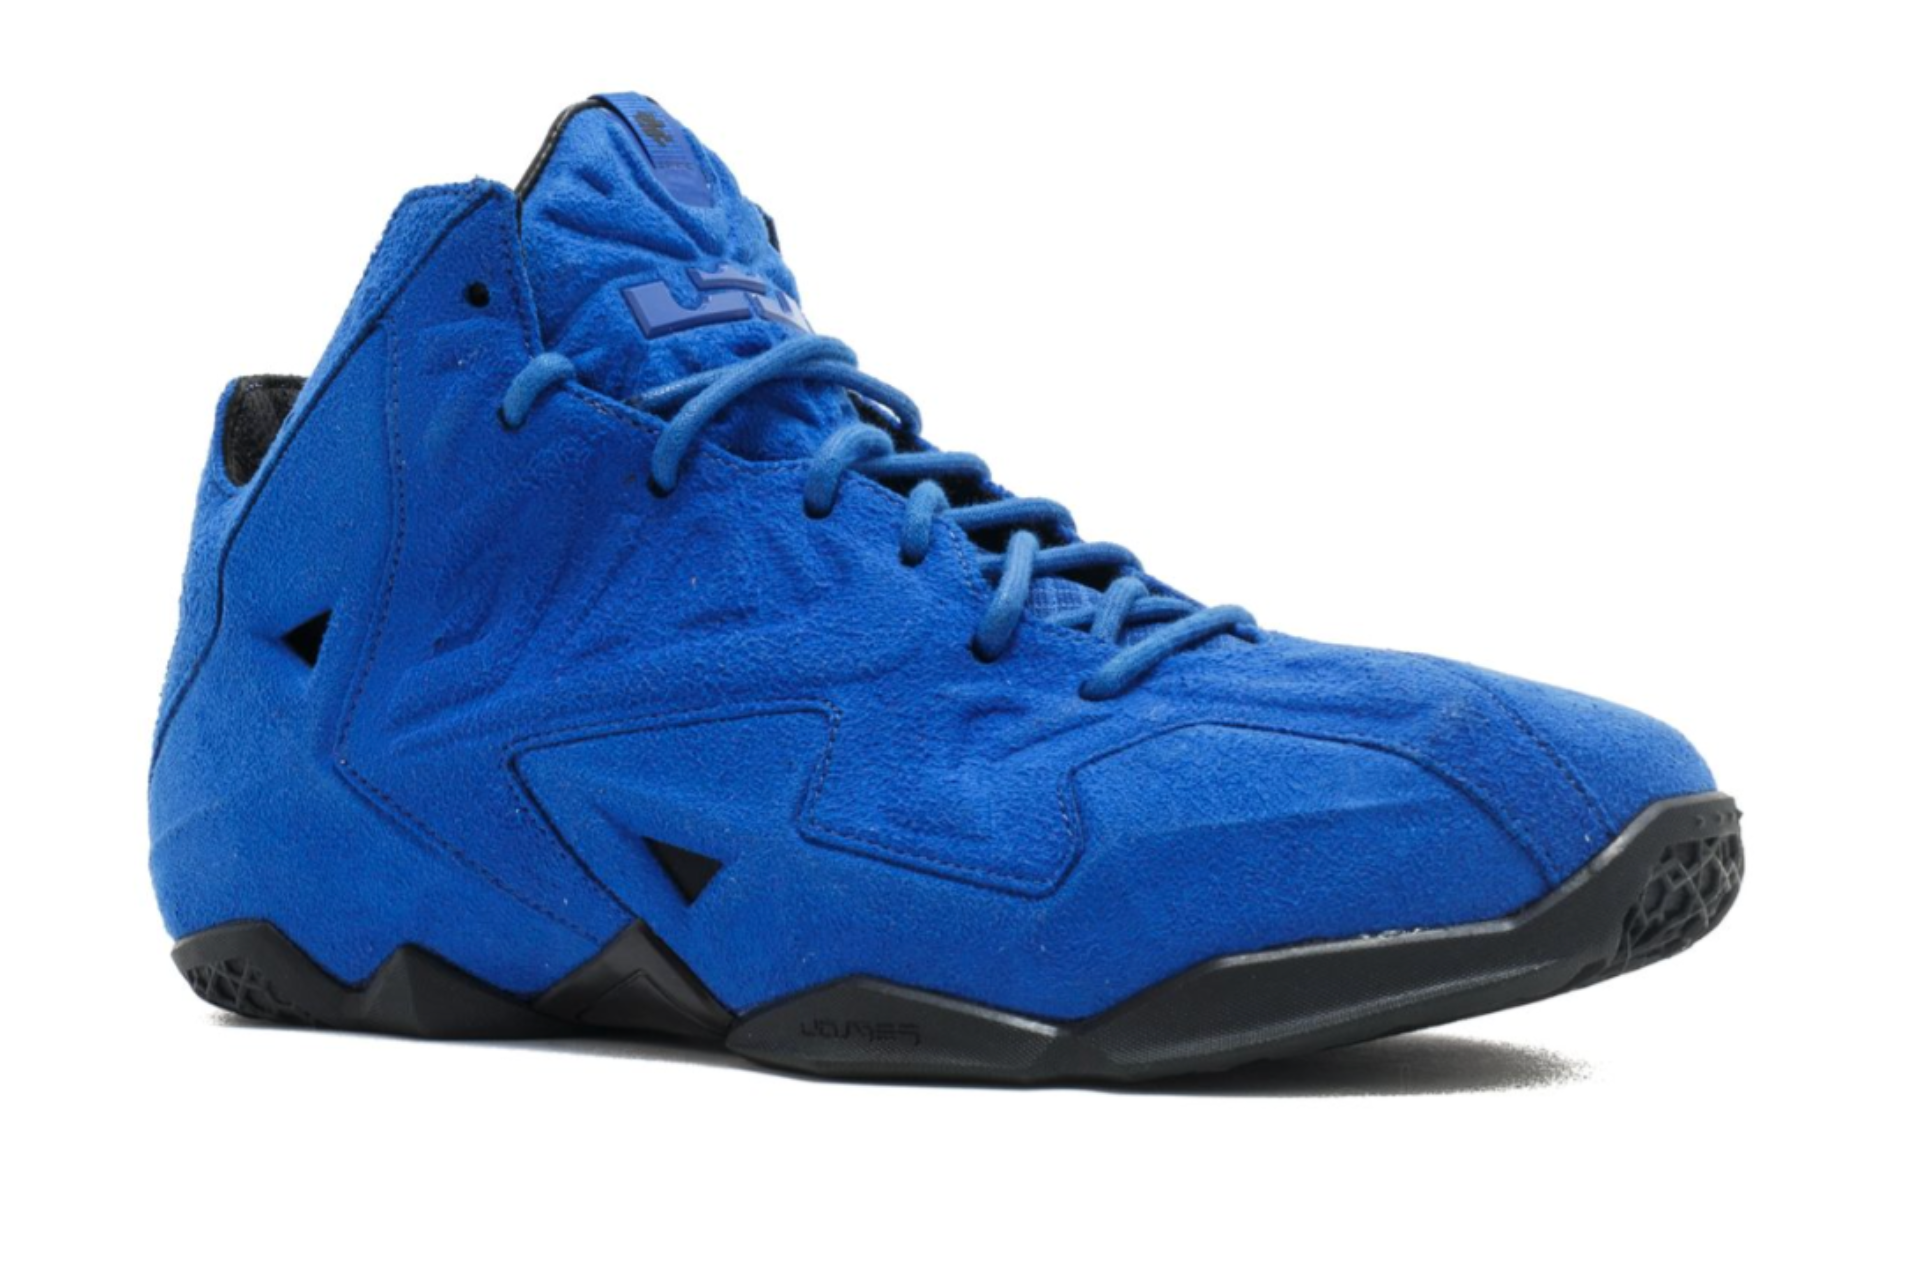 NIKE LEBRON 11 EXT BLUE SUEDE